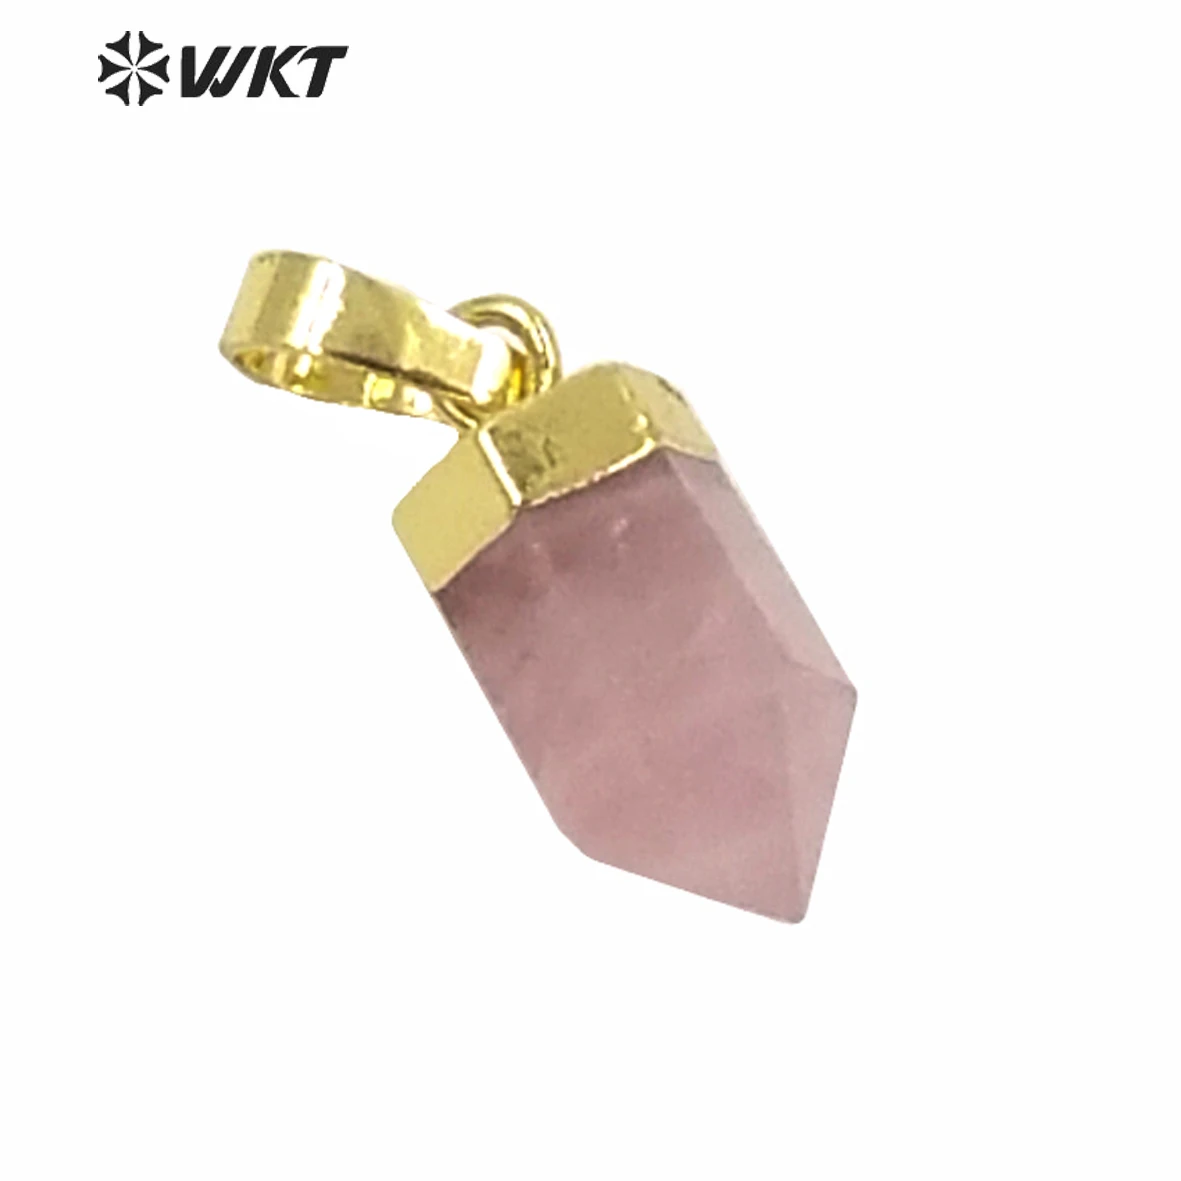 

WT-P1332 WKT Wholesale Bullet Point Tiny Exquisite 24k Real Gold Silver Plated Rose quartz Pendant Gift for Girl, Picture